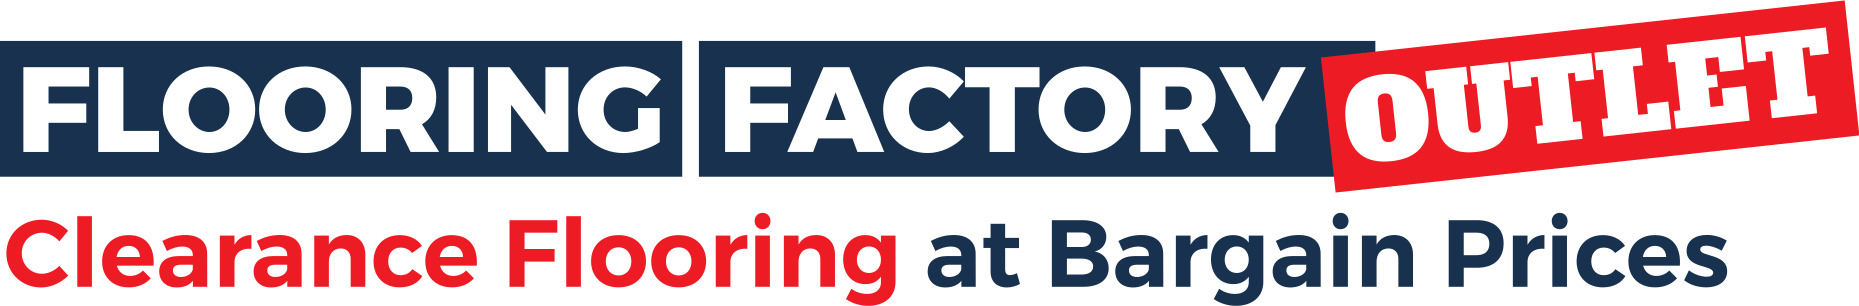 Logo of Flooring Factory Outlet Carpets And Flooring - Retail In Croydon, London